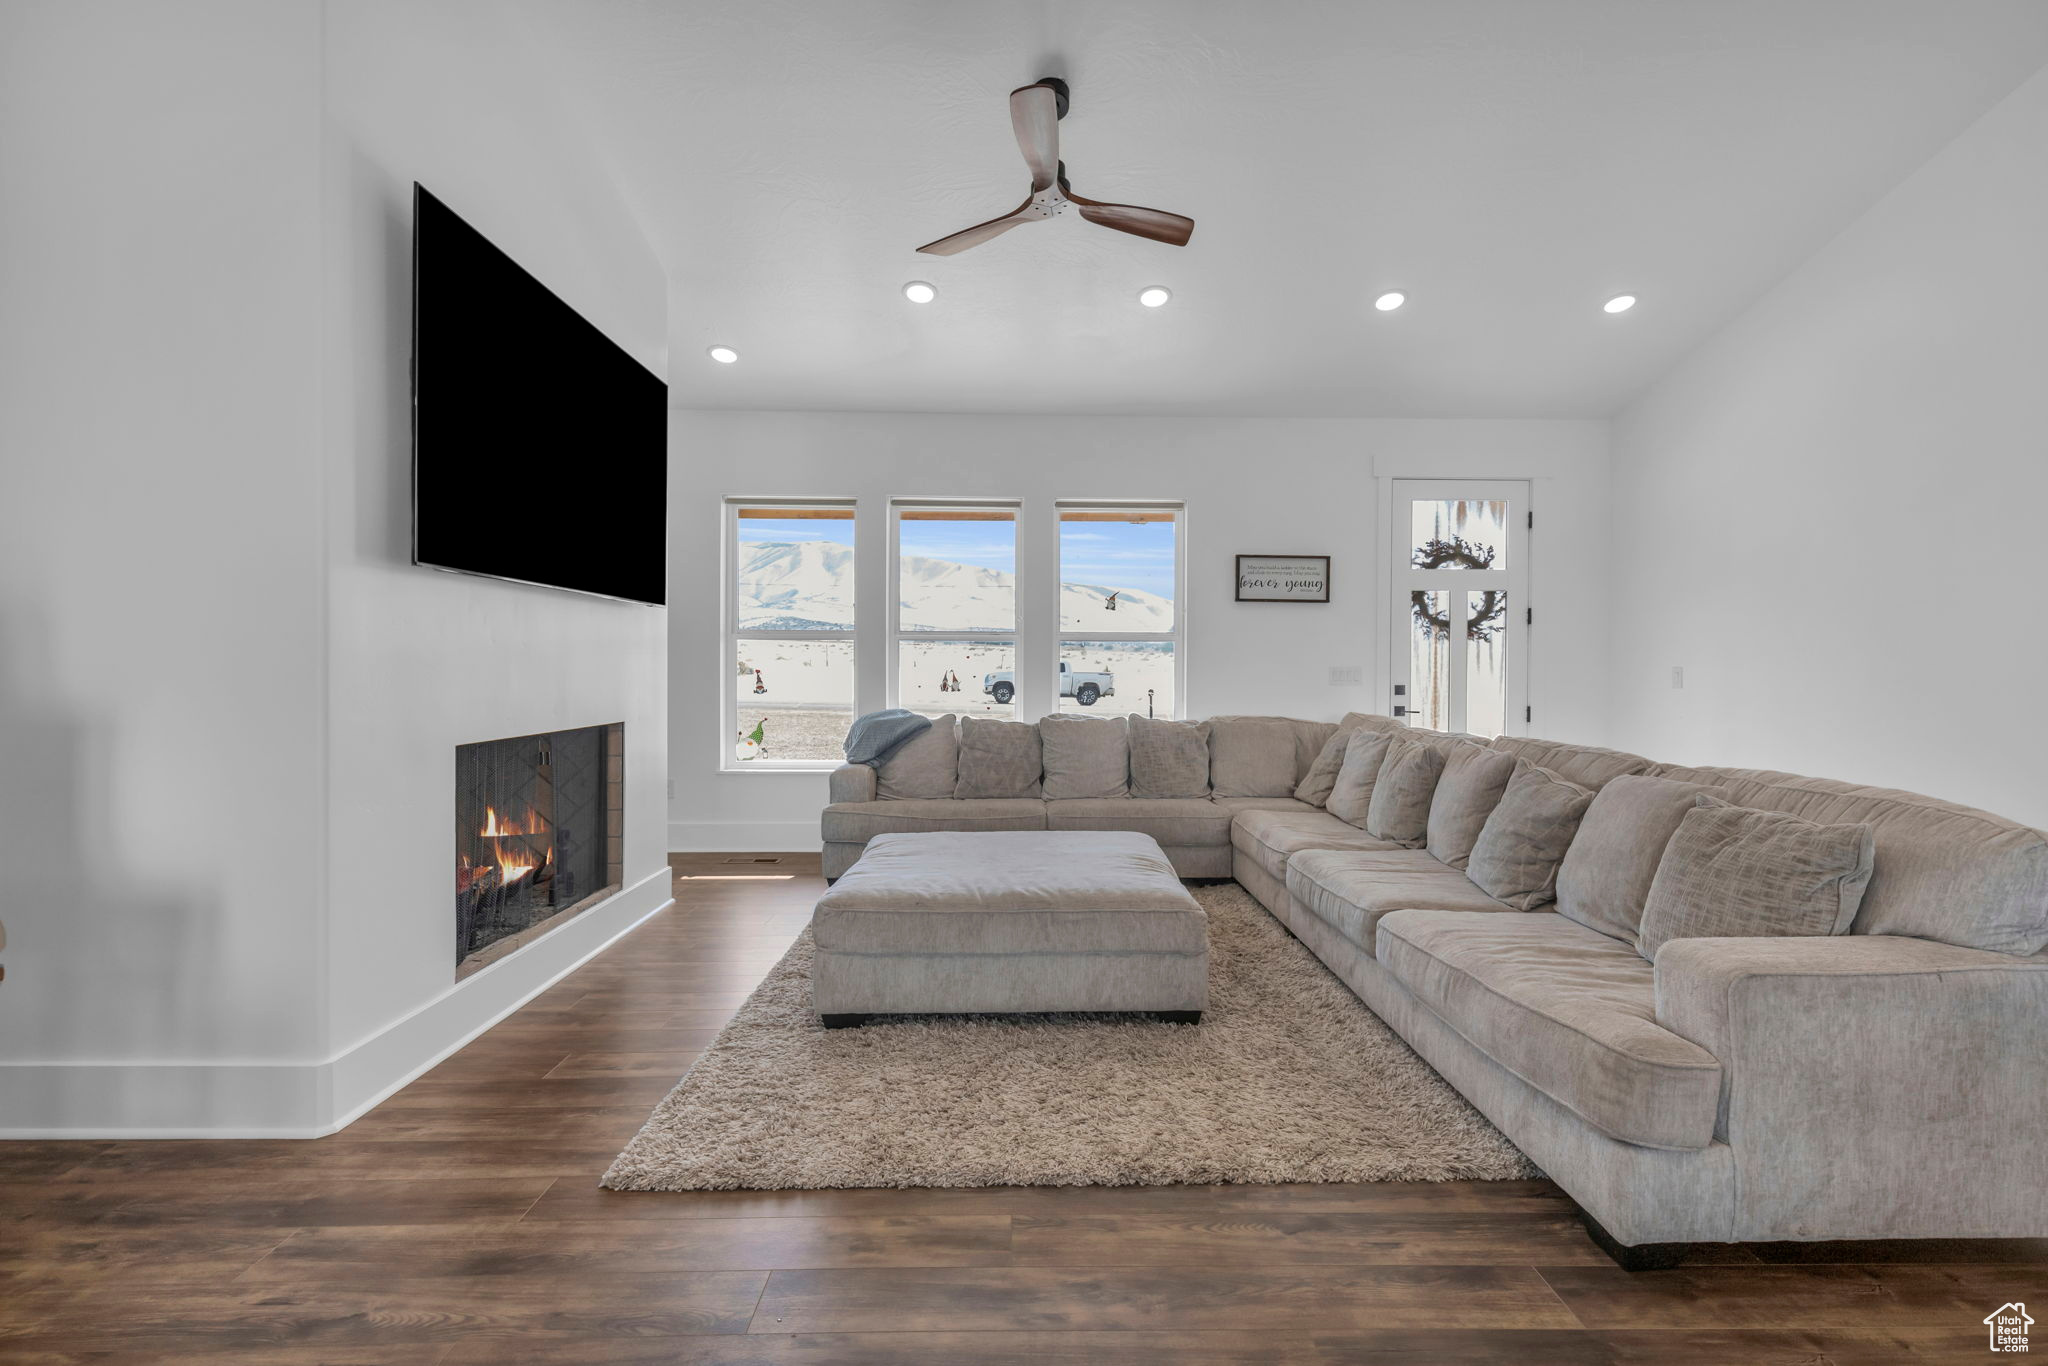 Living room featuring dark wood-type flooring and ceiling fan